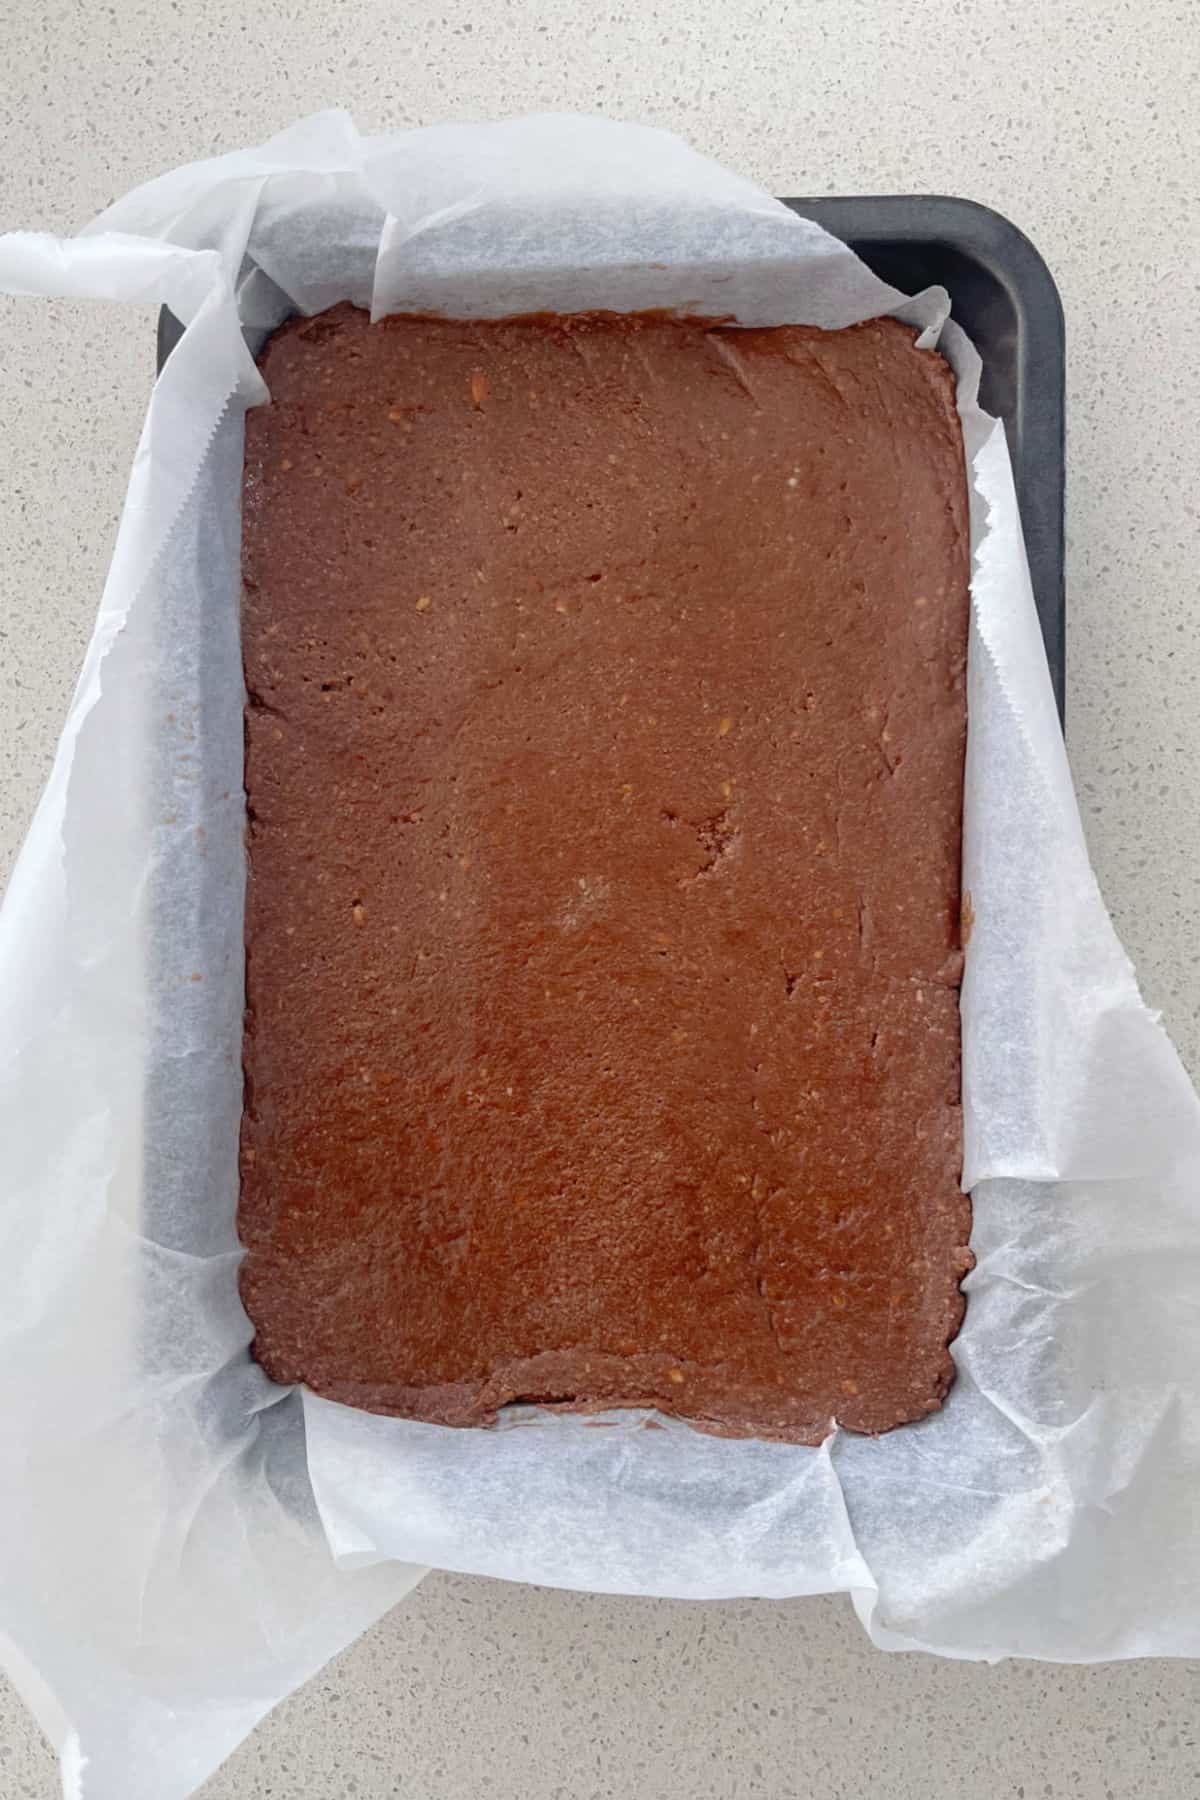 Chocolate Slice pressed down into a baking tray.